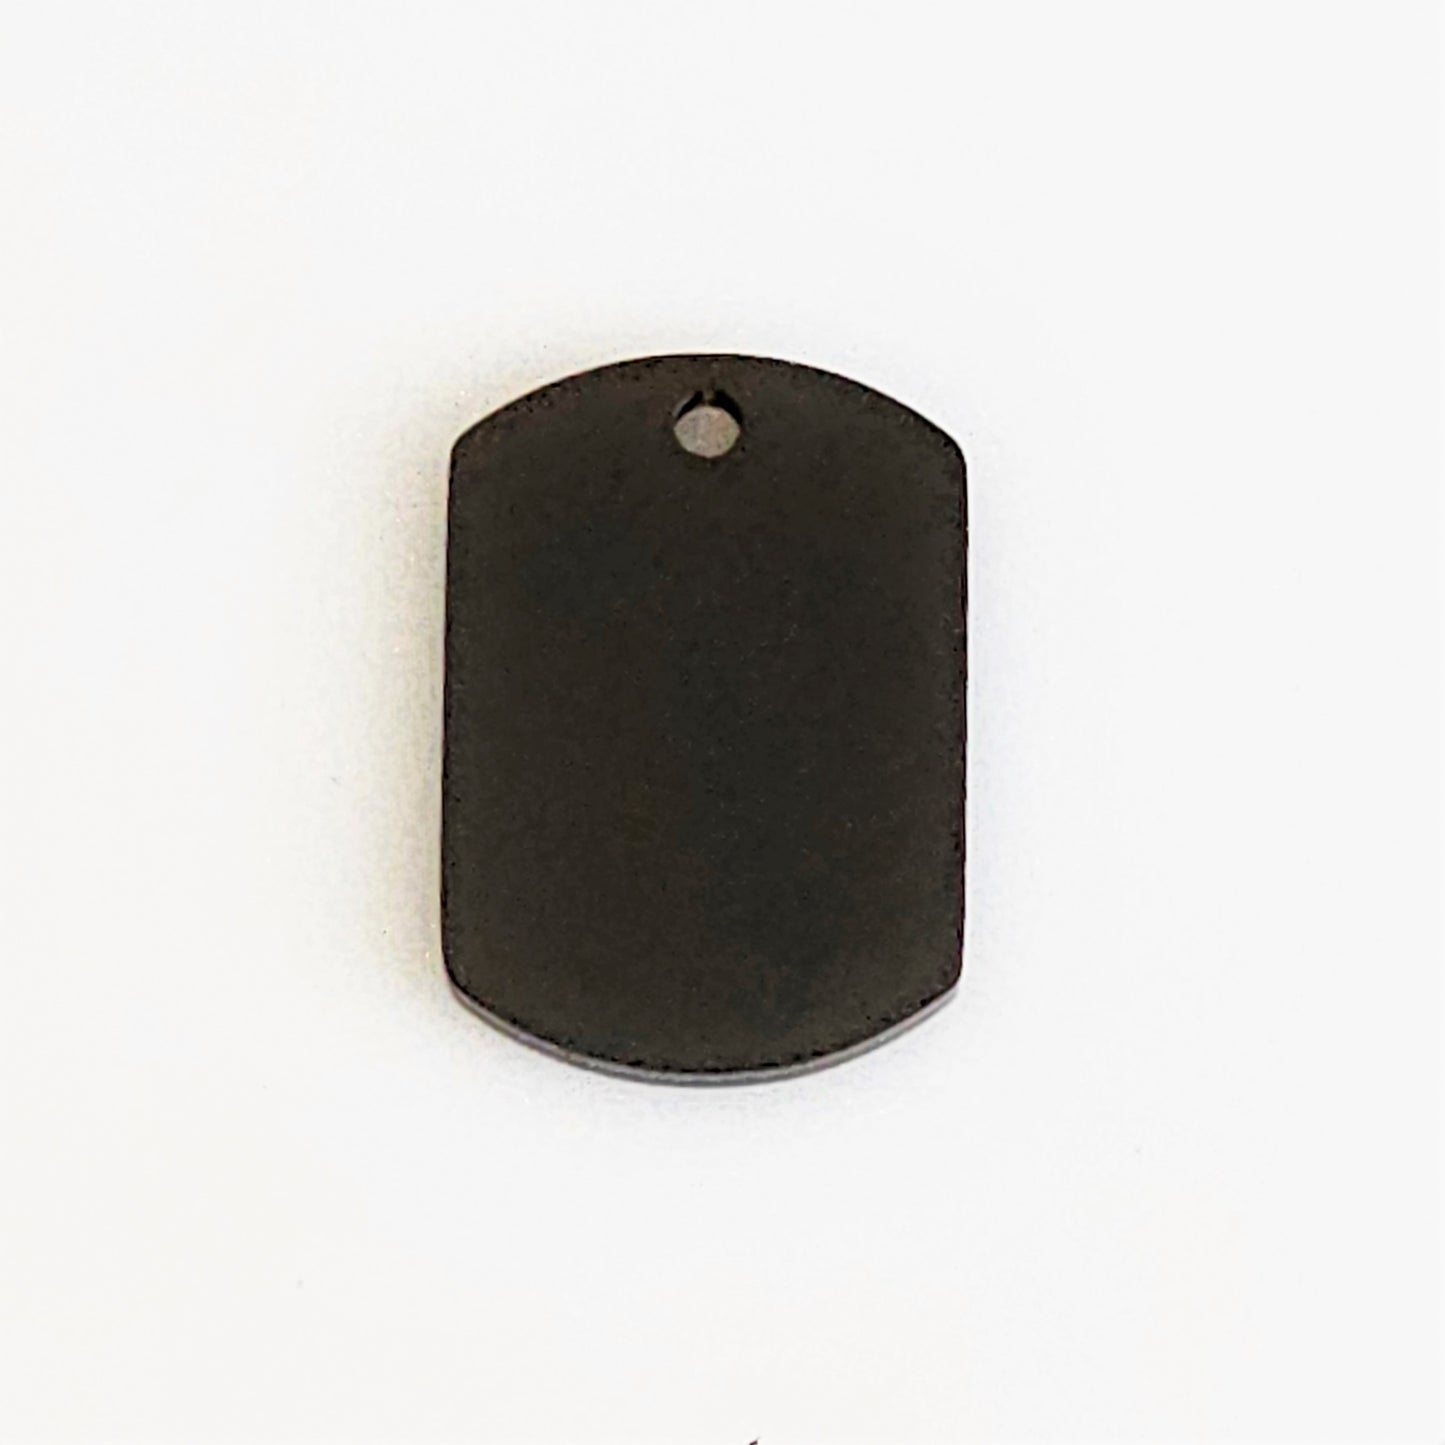 Black Plated Stainless Steel - 1/2" x 3/4" Dog Tag